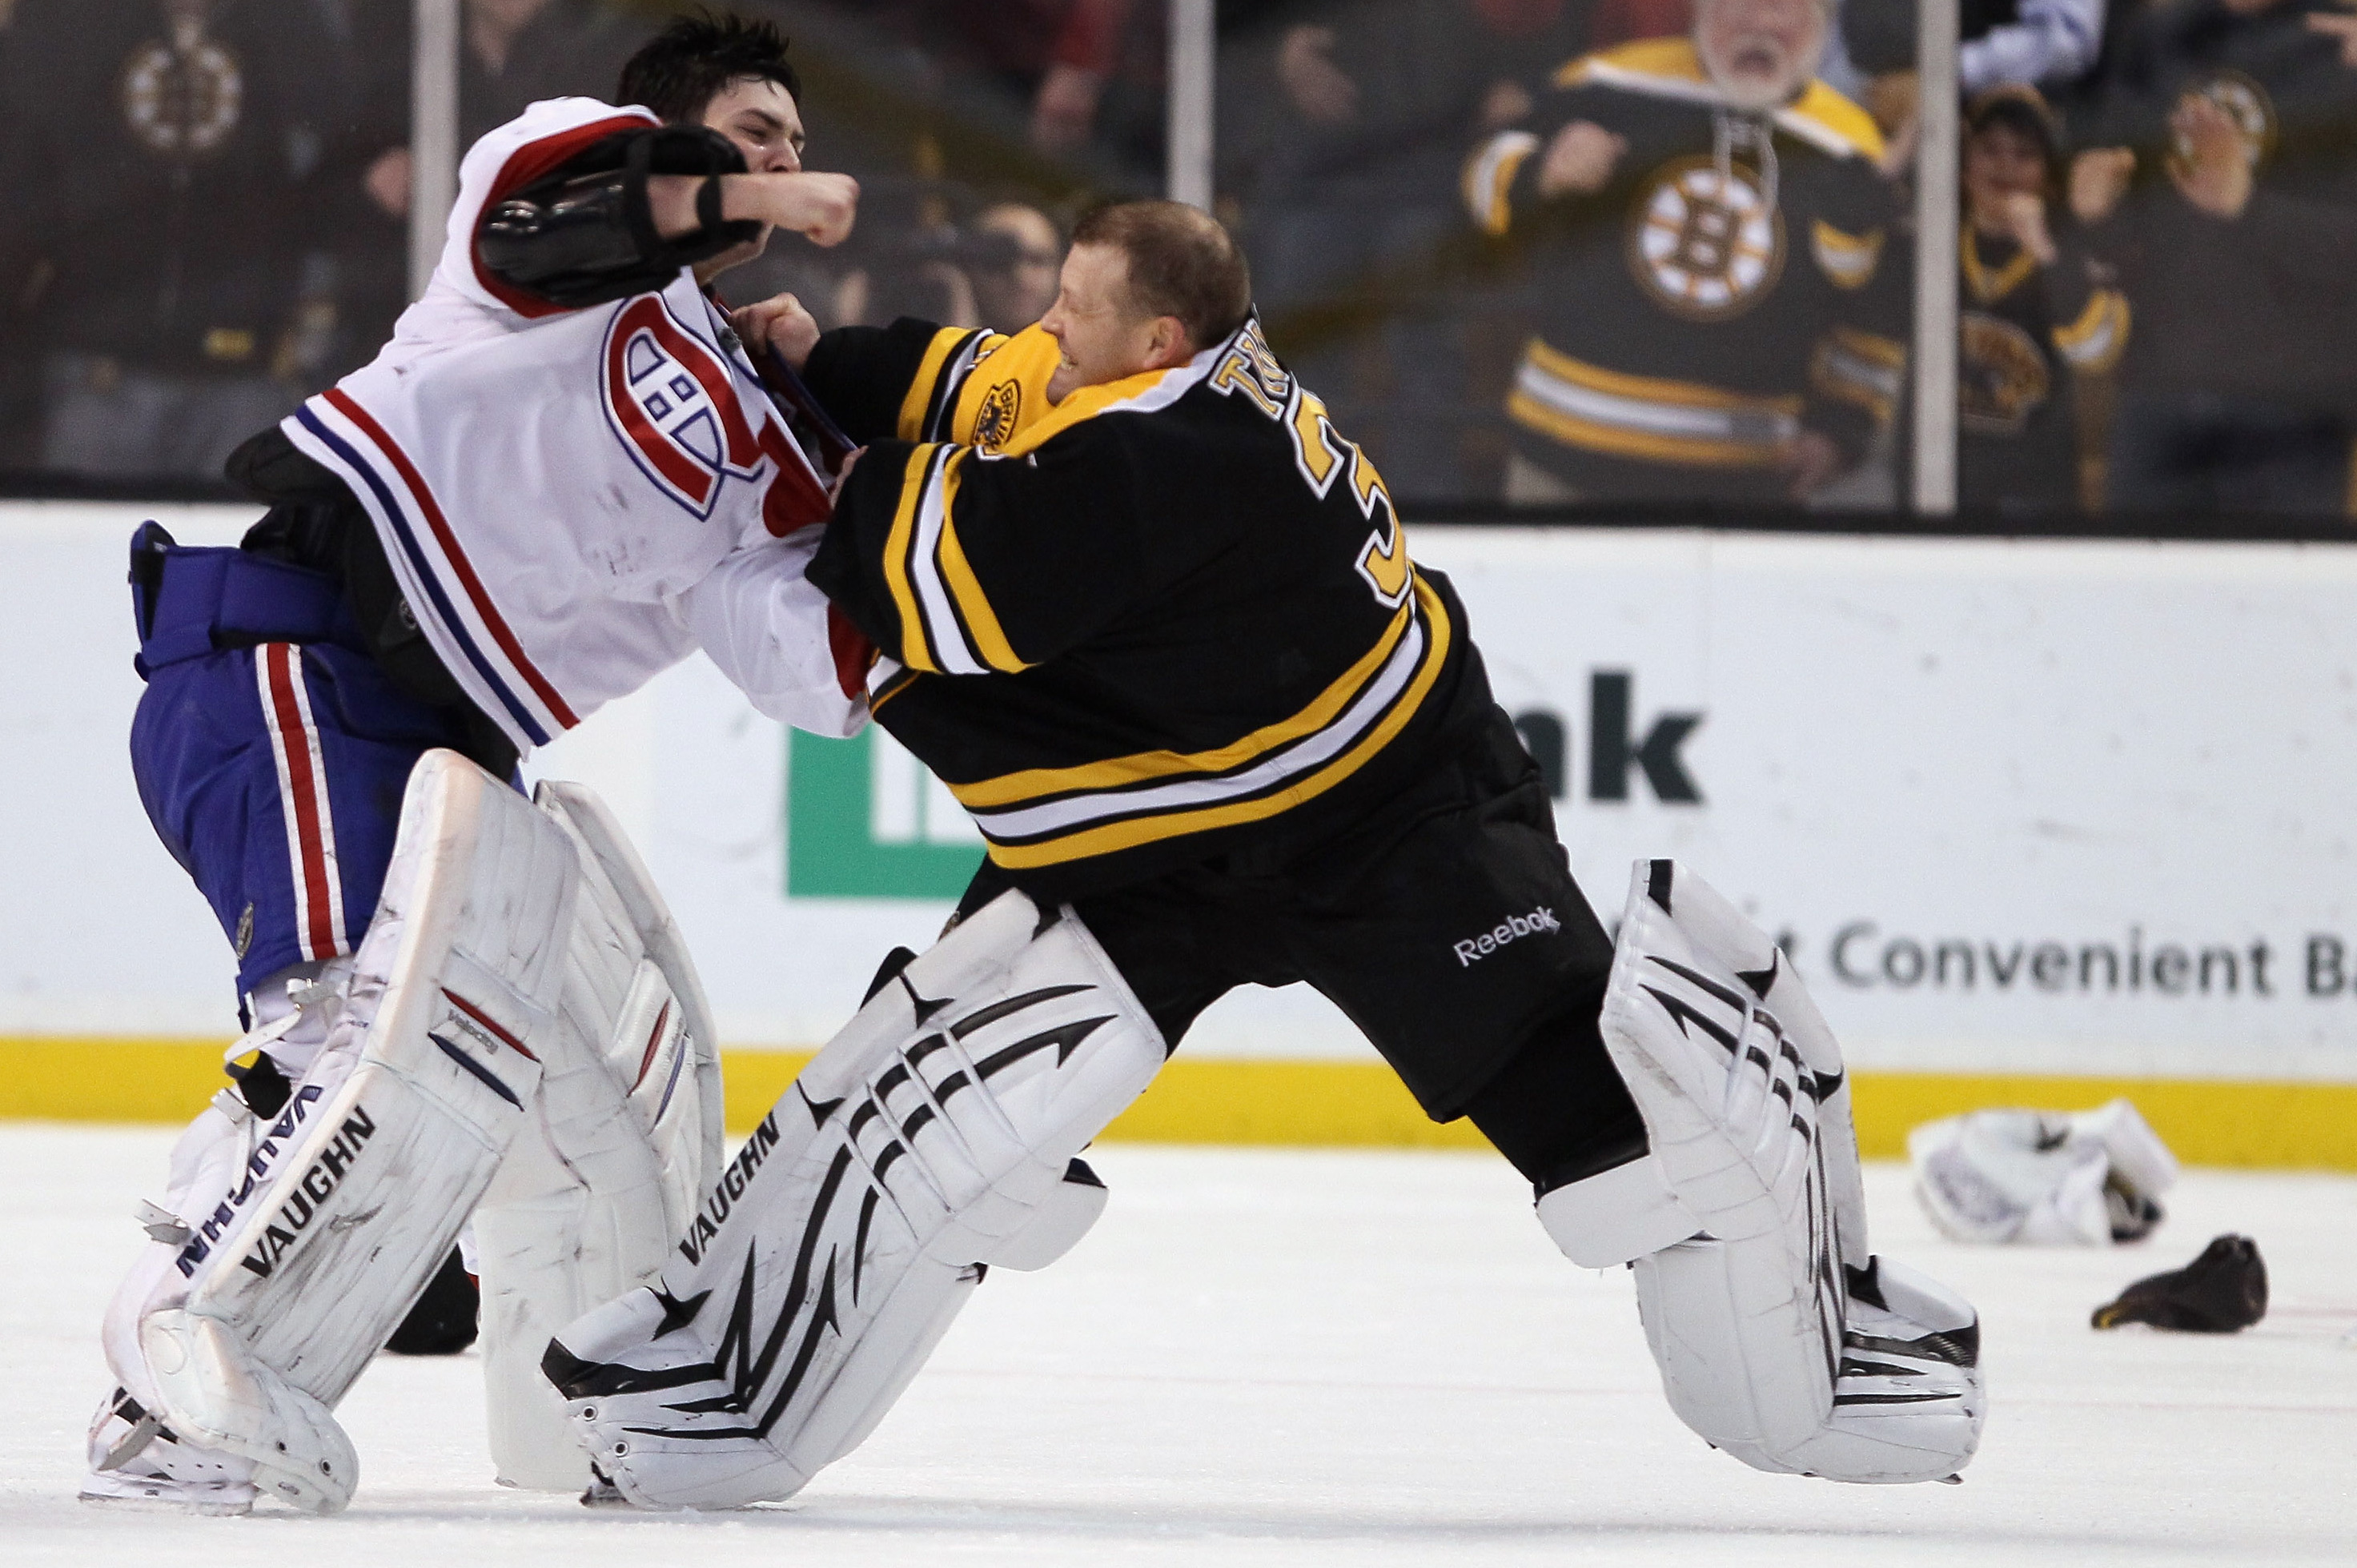 Mike Rupp says nothing to make of incident with Martin Brodeur